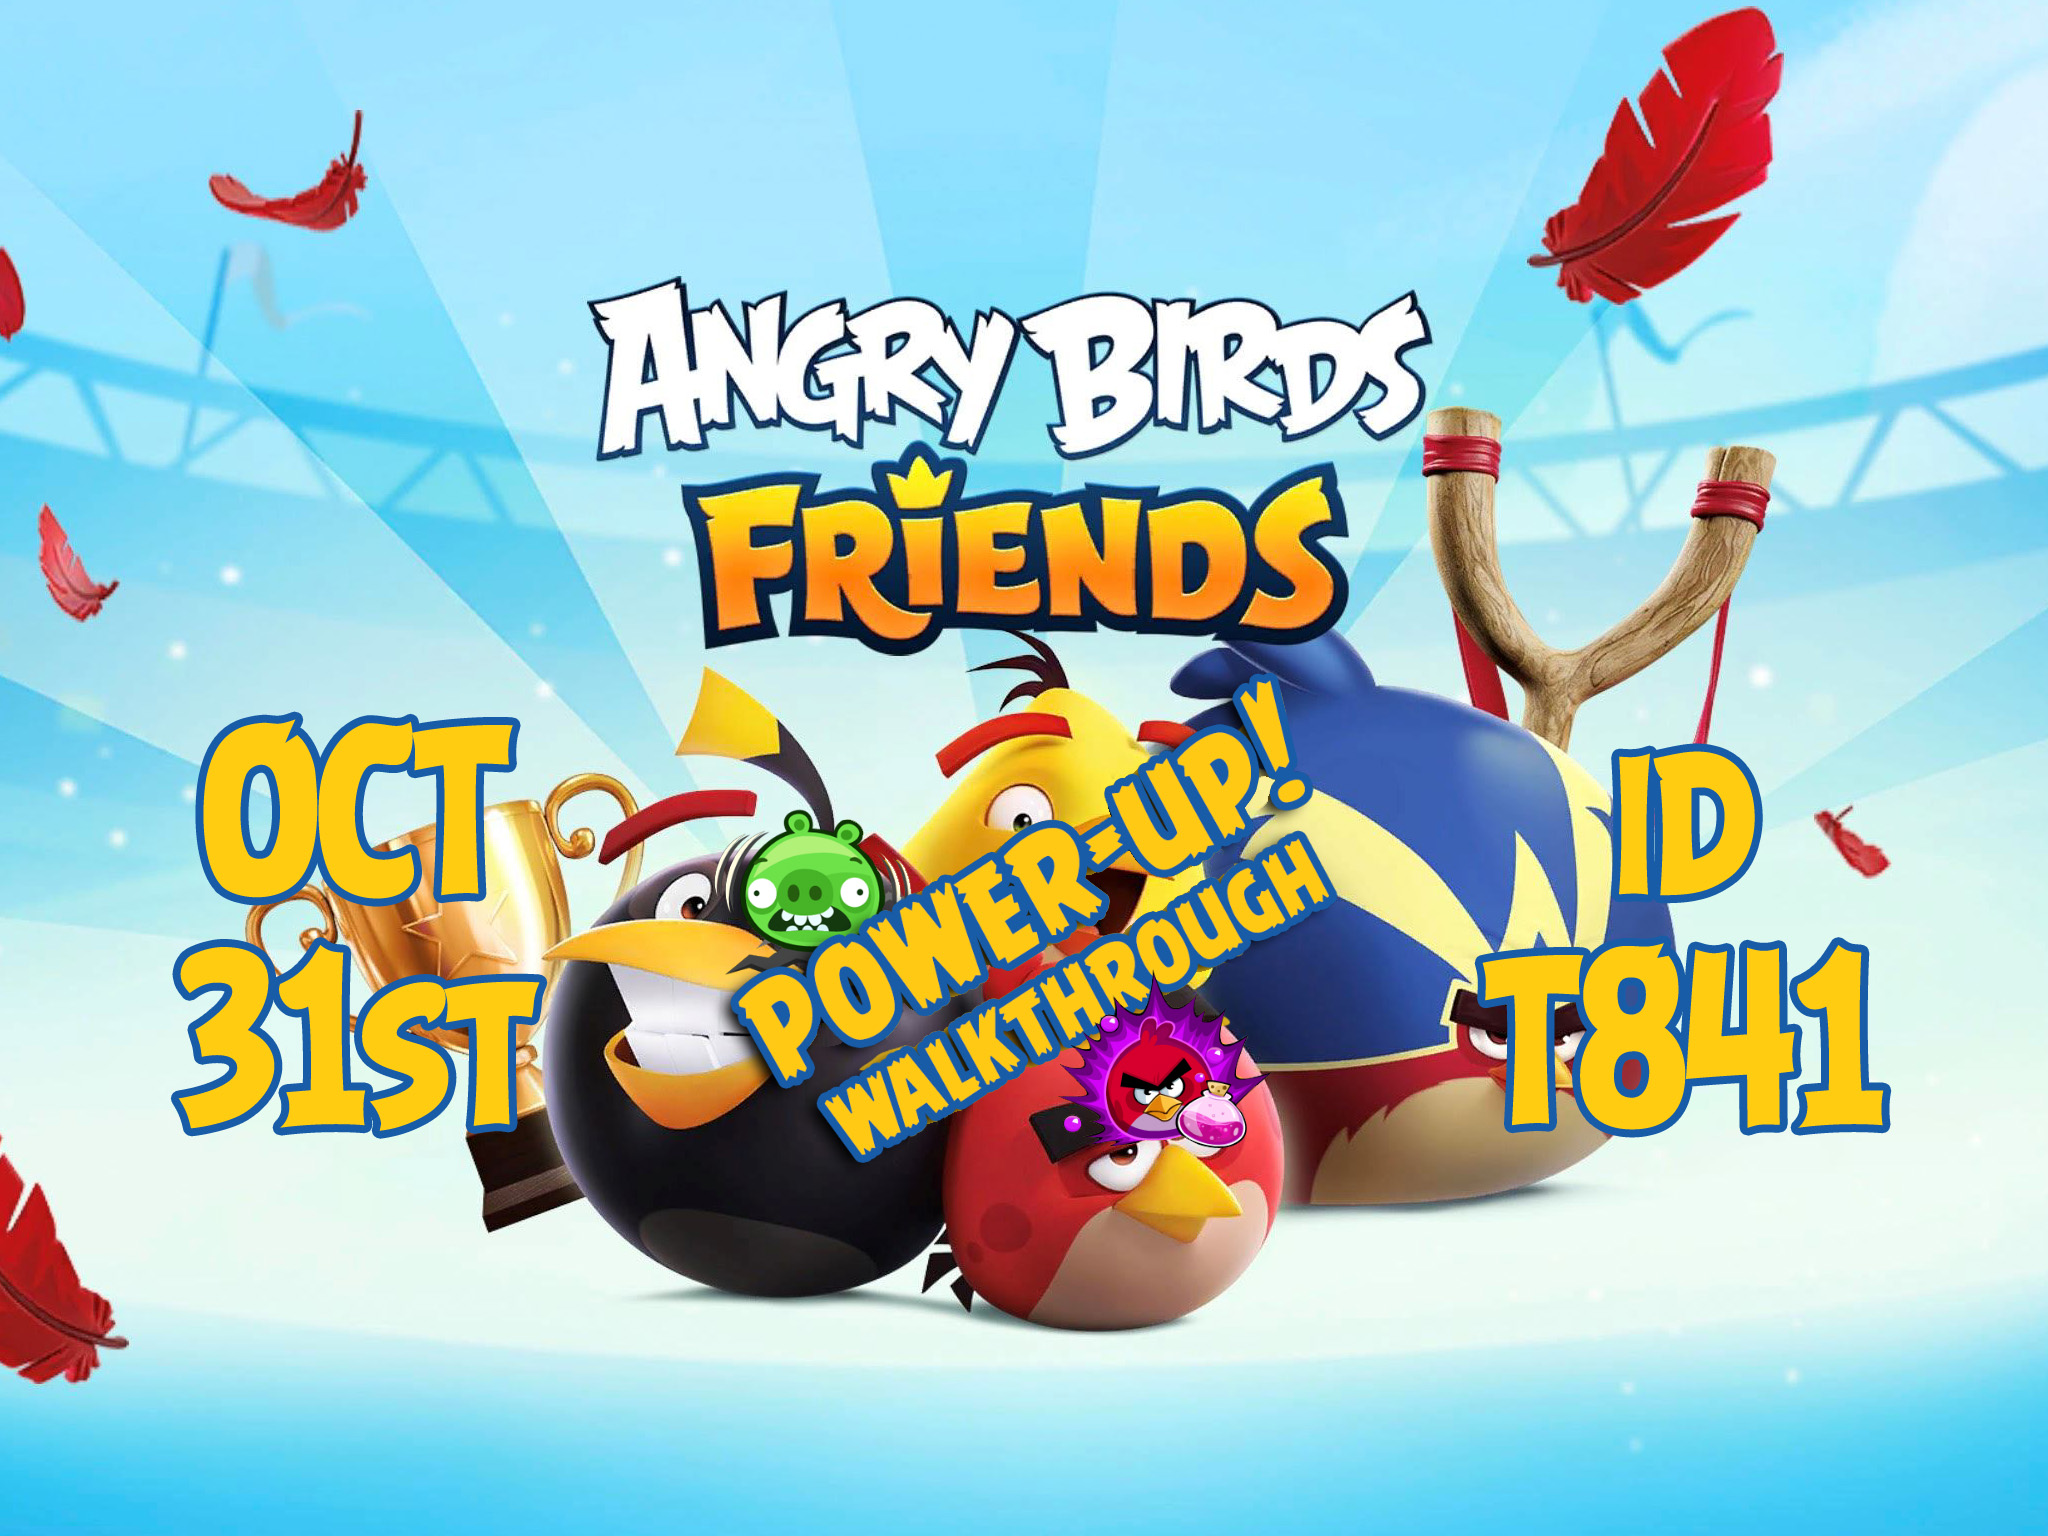 Angry-Birds-Friends-Tournament-T841-Feature-Image-PU